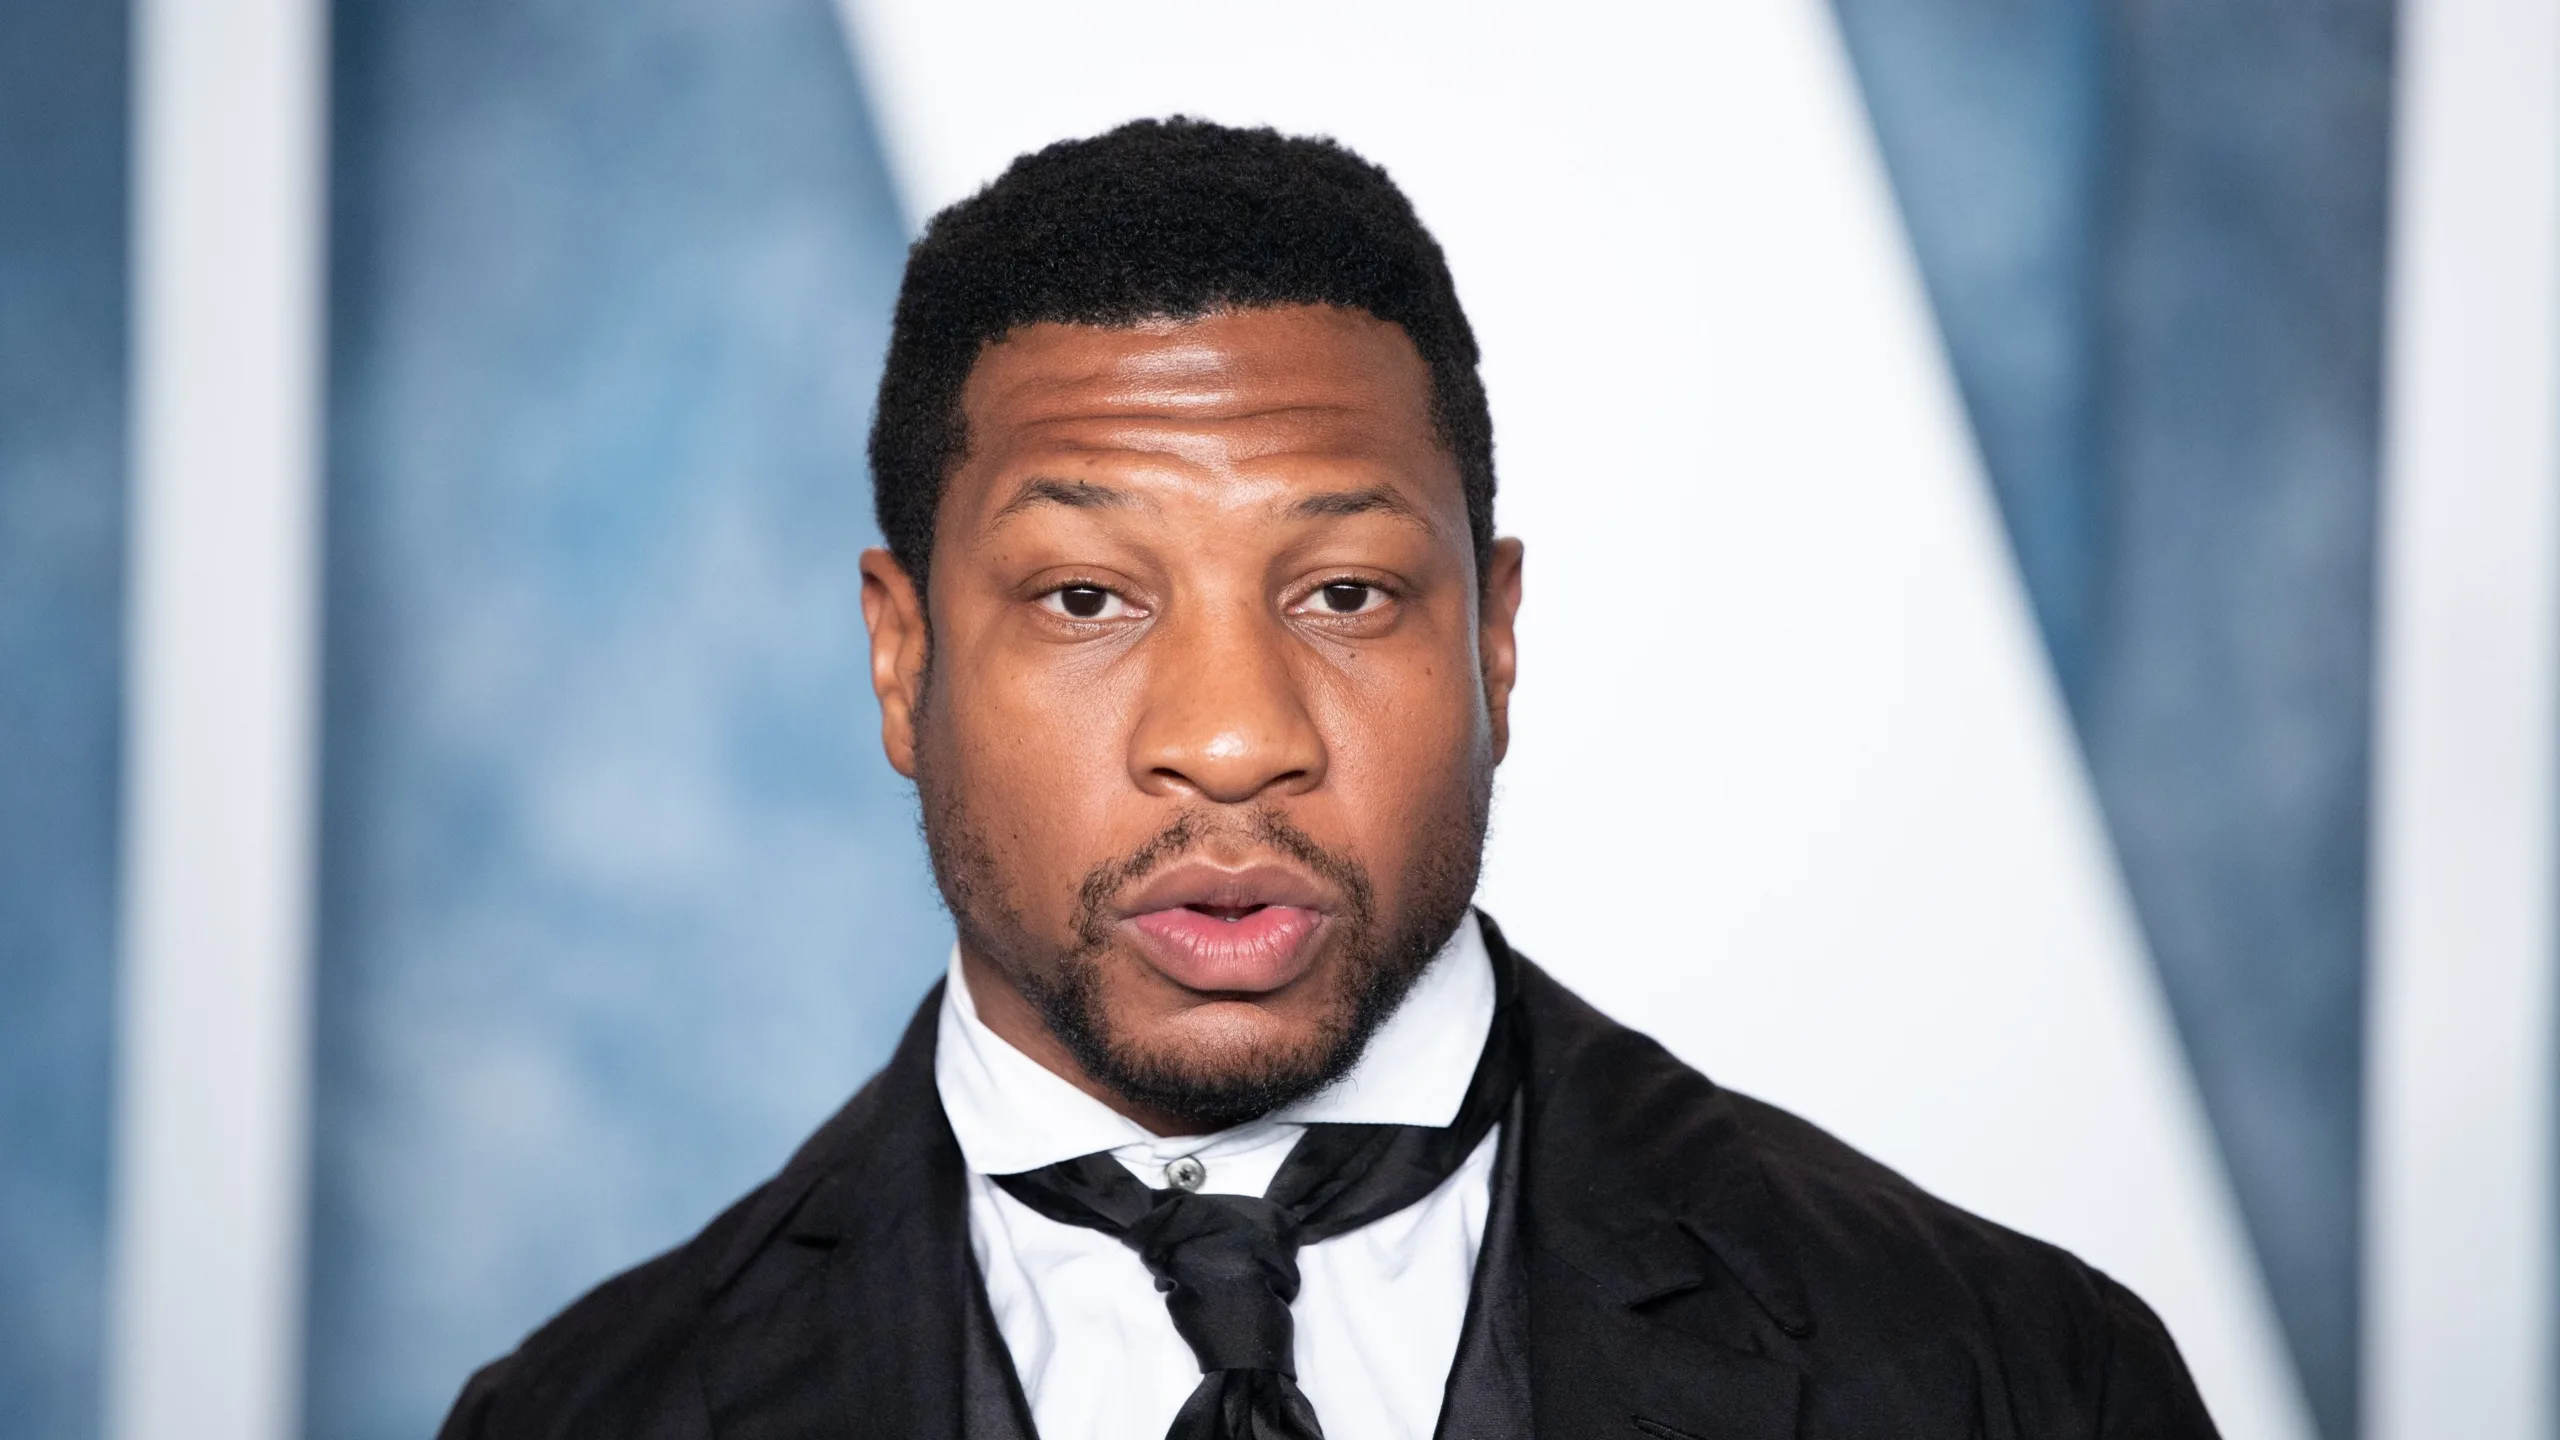 Jonathan Majors Domestic Violence Trial Delayed to September